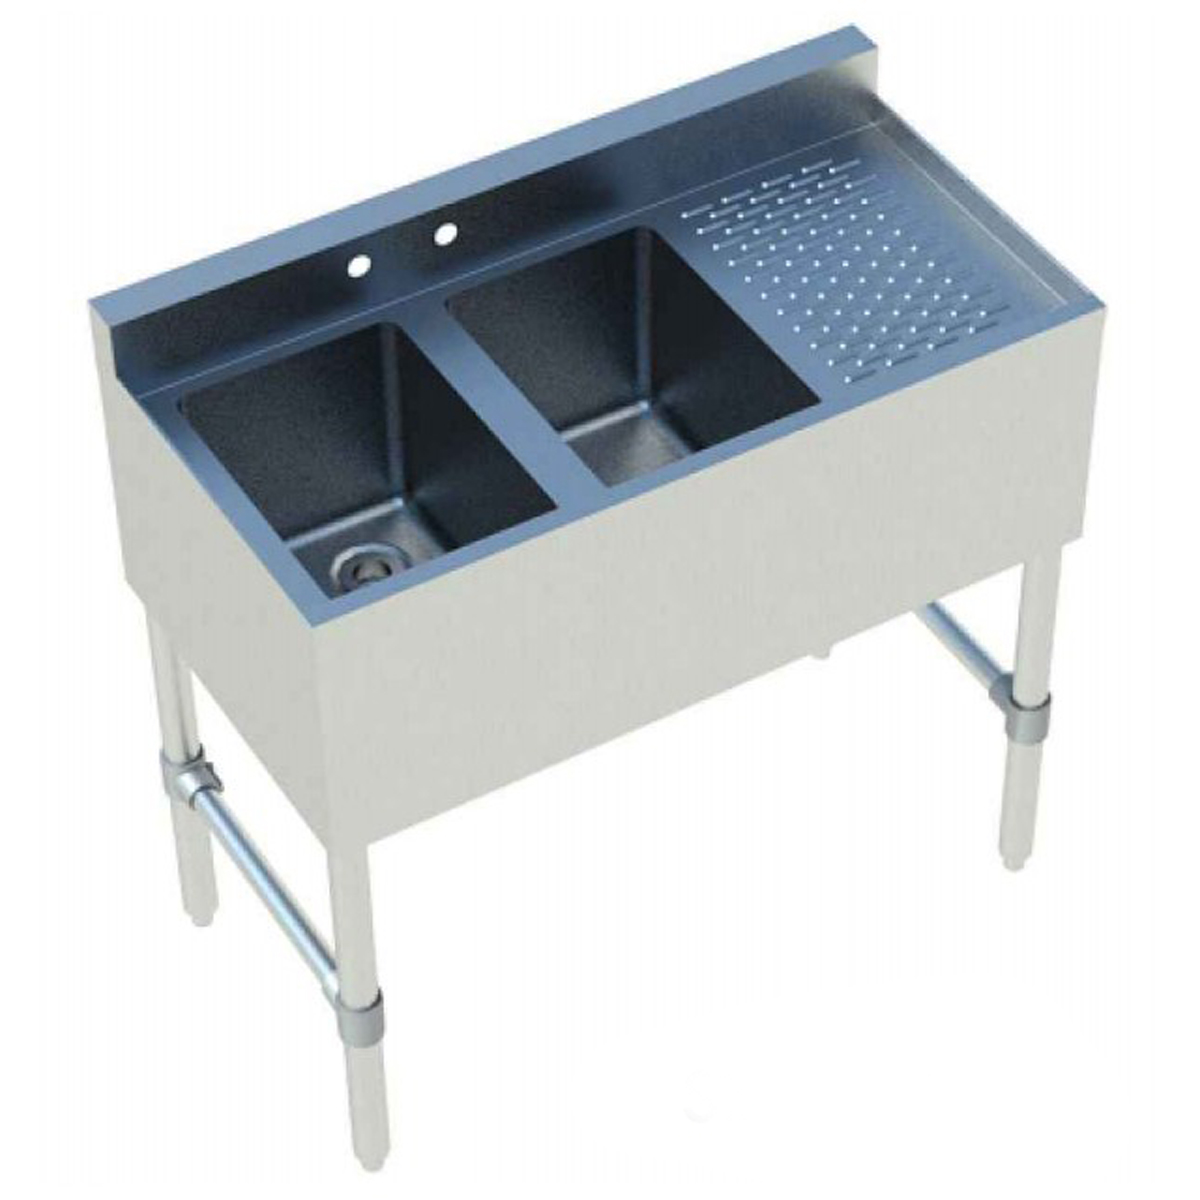 Sapphire SMBS-2R Two Compartment Underbar Sink Unit with Right Drainboard